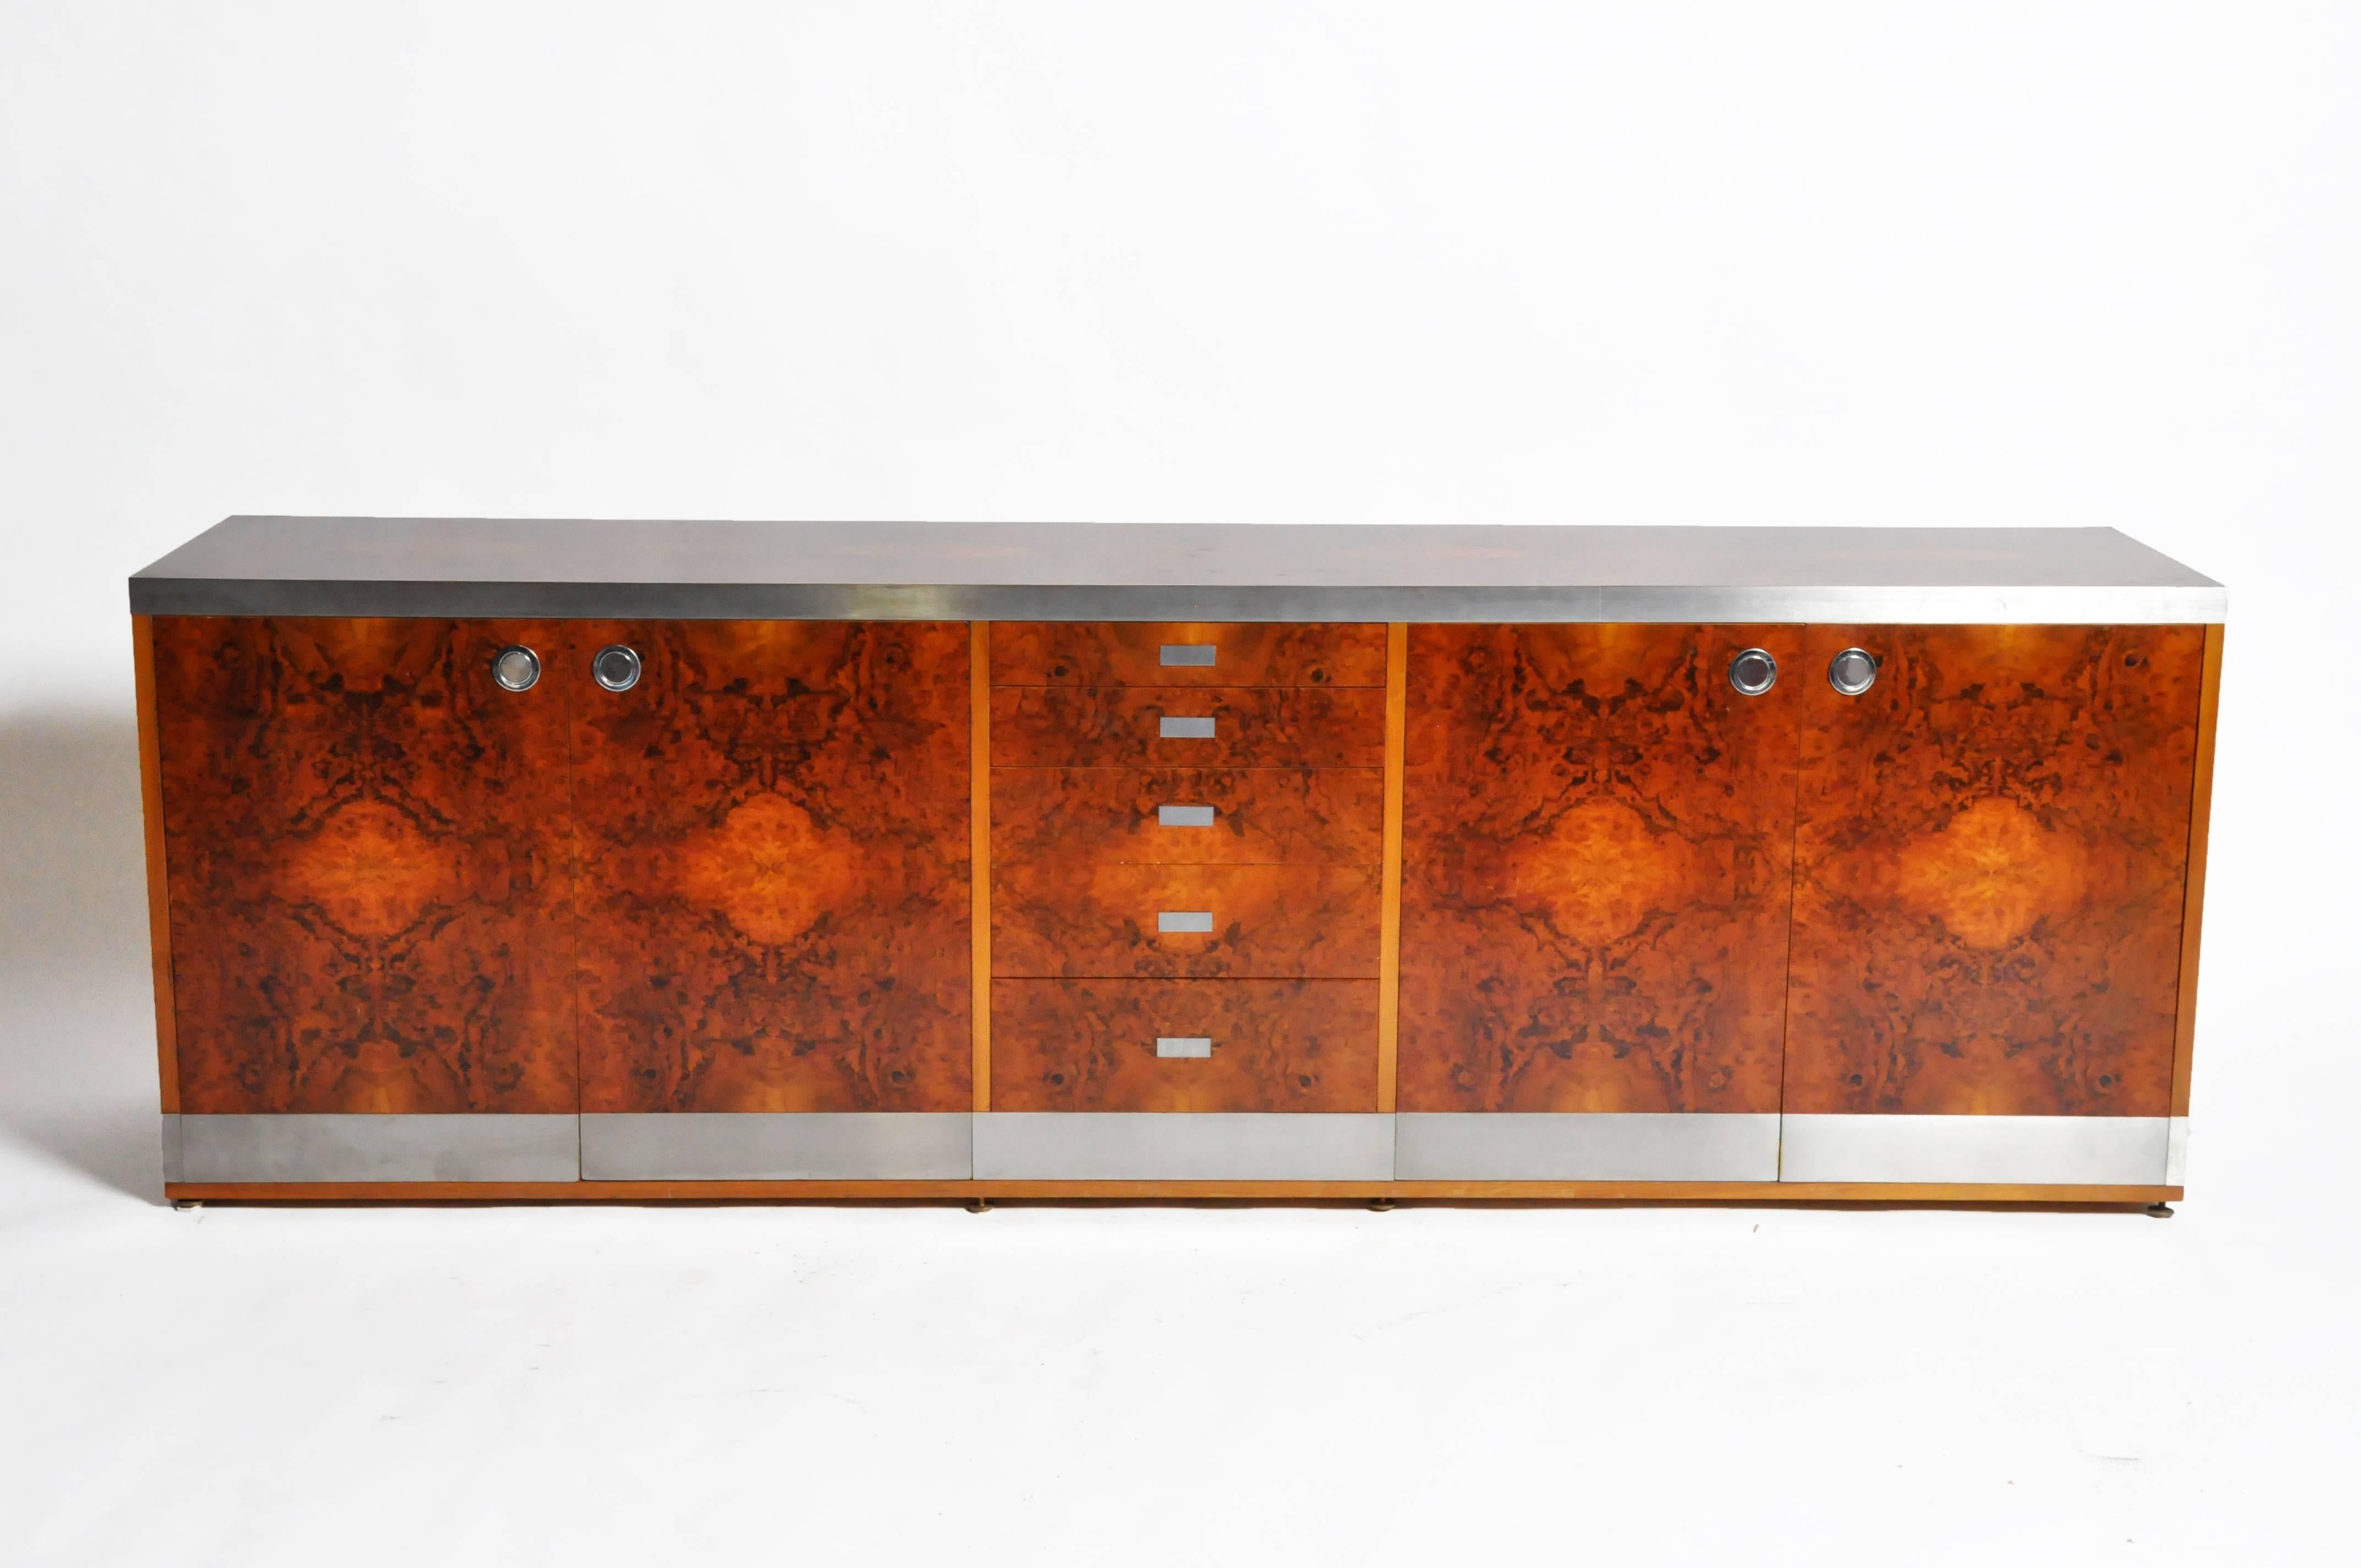 This Willy Rizzo console is from France and was made from walnut veneer and chrome, circa 1970. The elegant piece features five drawers and additional shelves for ample storage. 

Willy Rizzo's furniture design channeled the sophistication of Mies